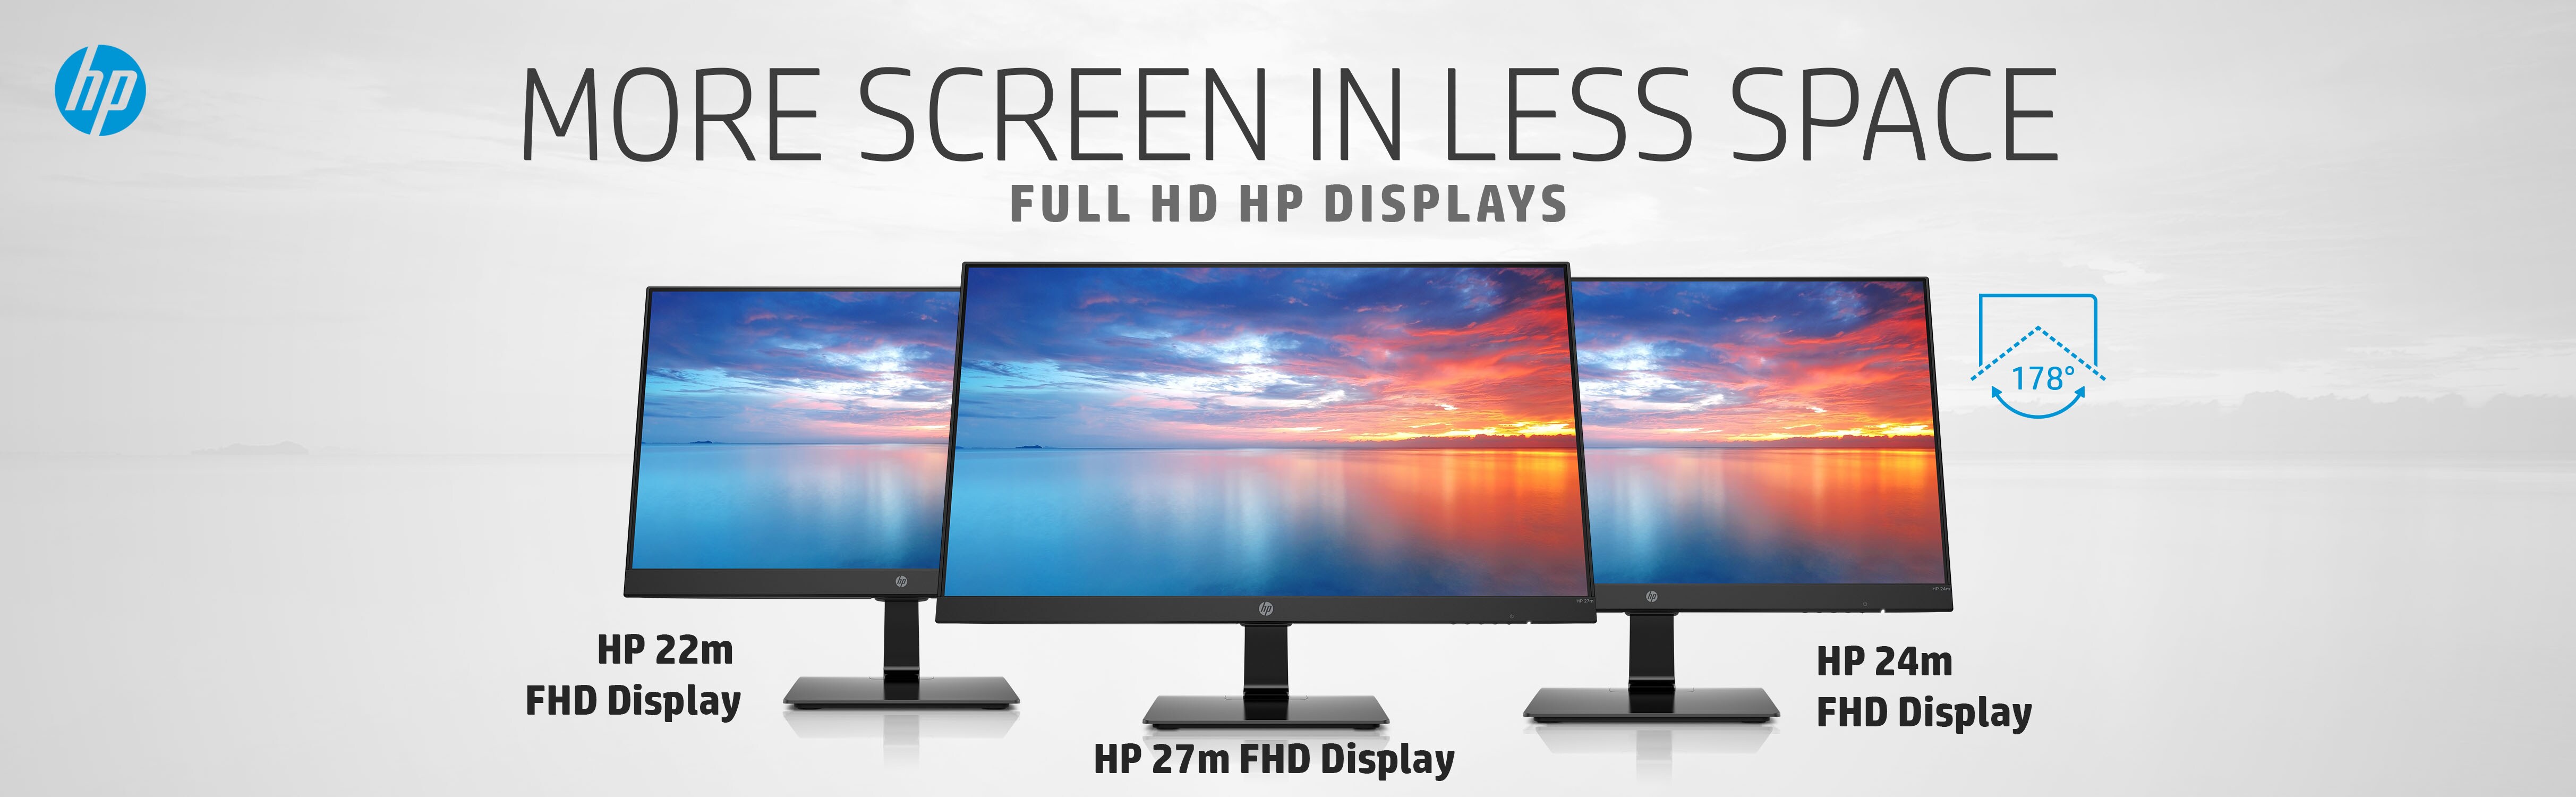 HP 27m 27-inch Display| HP® Official Store.